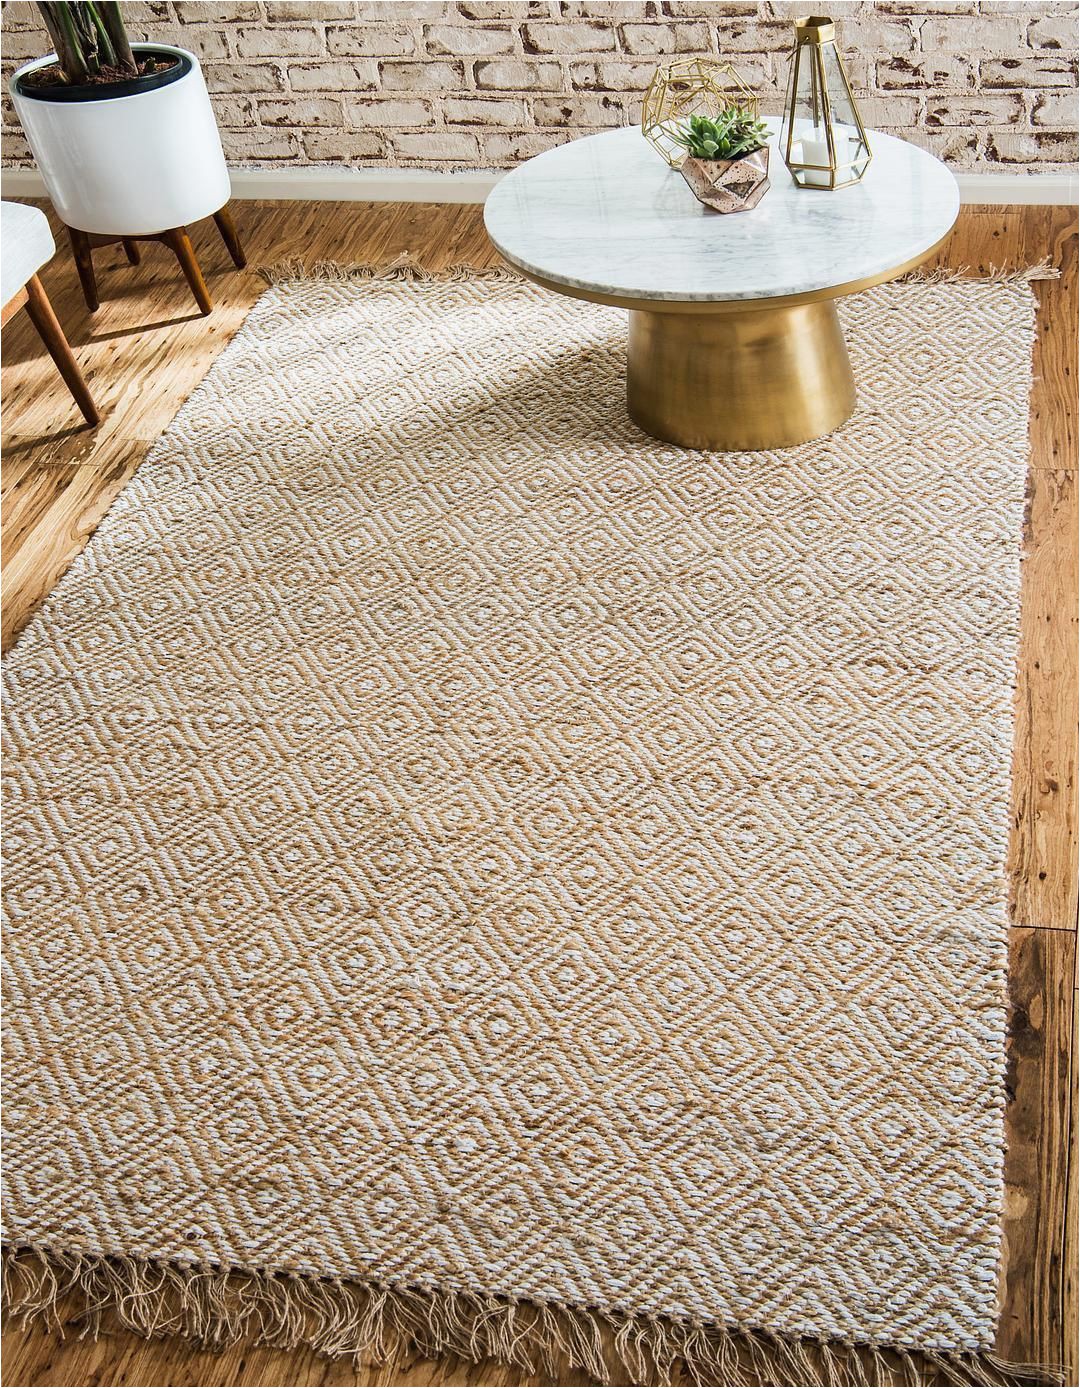 Bed Bath and Beyond Jute Rug Option 2 Kit Dining I Like the Darker Option Not This One